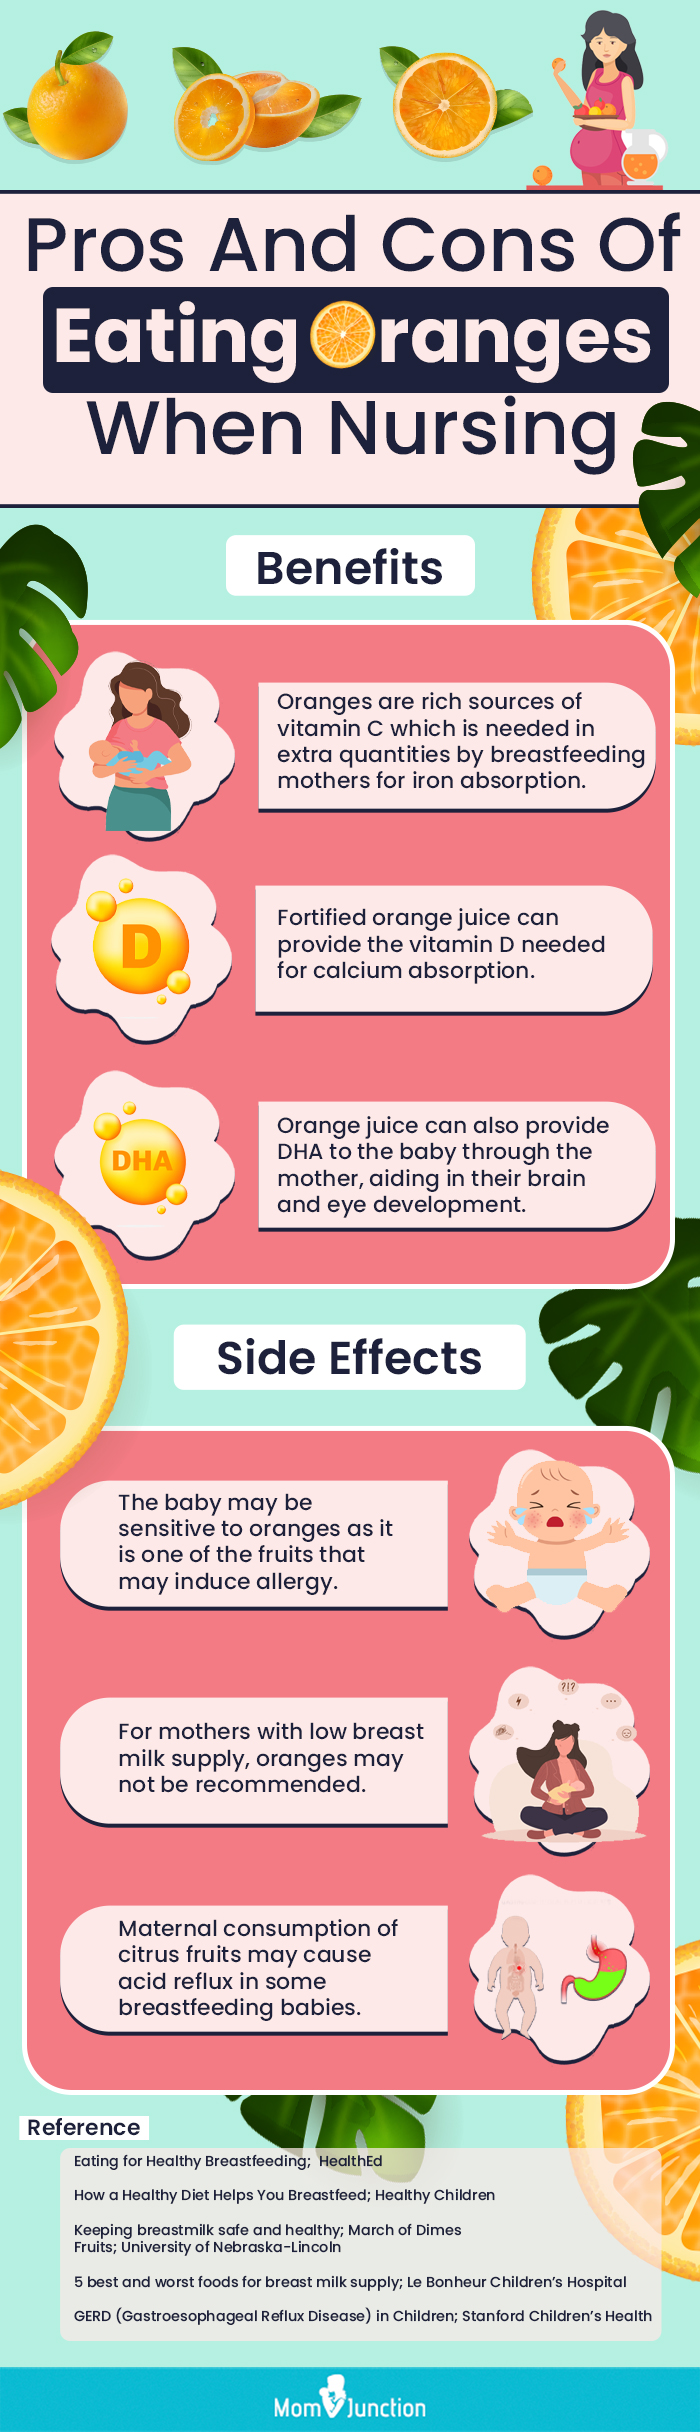 Is It Safe To Consider Eating Oranges While Breastfeeding?